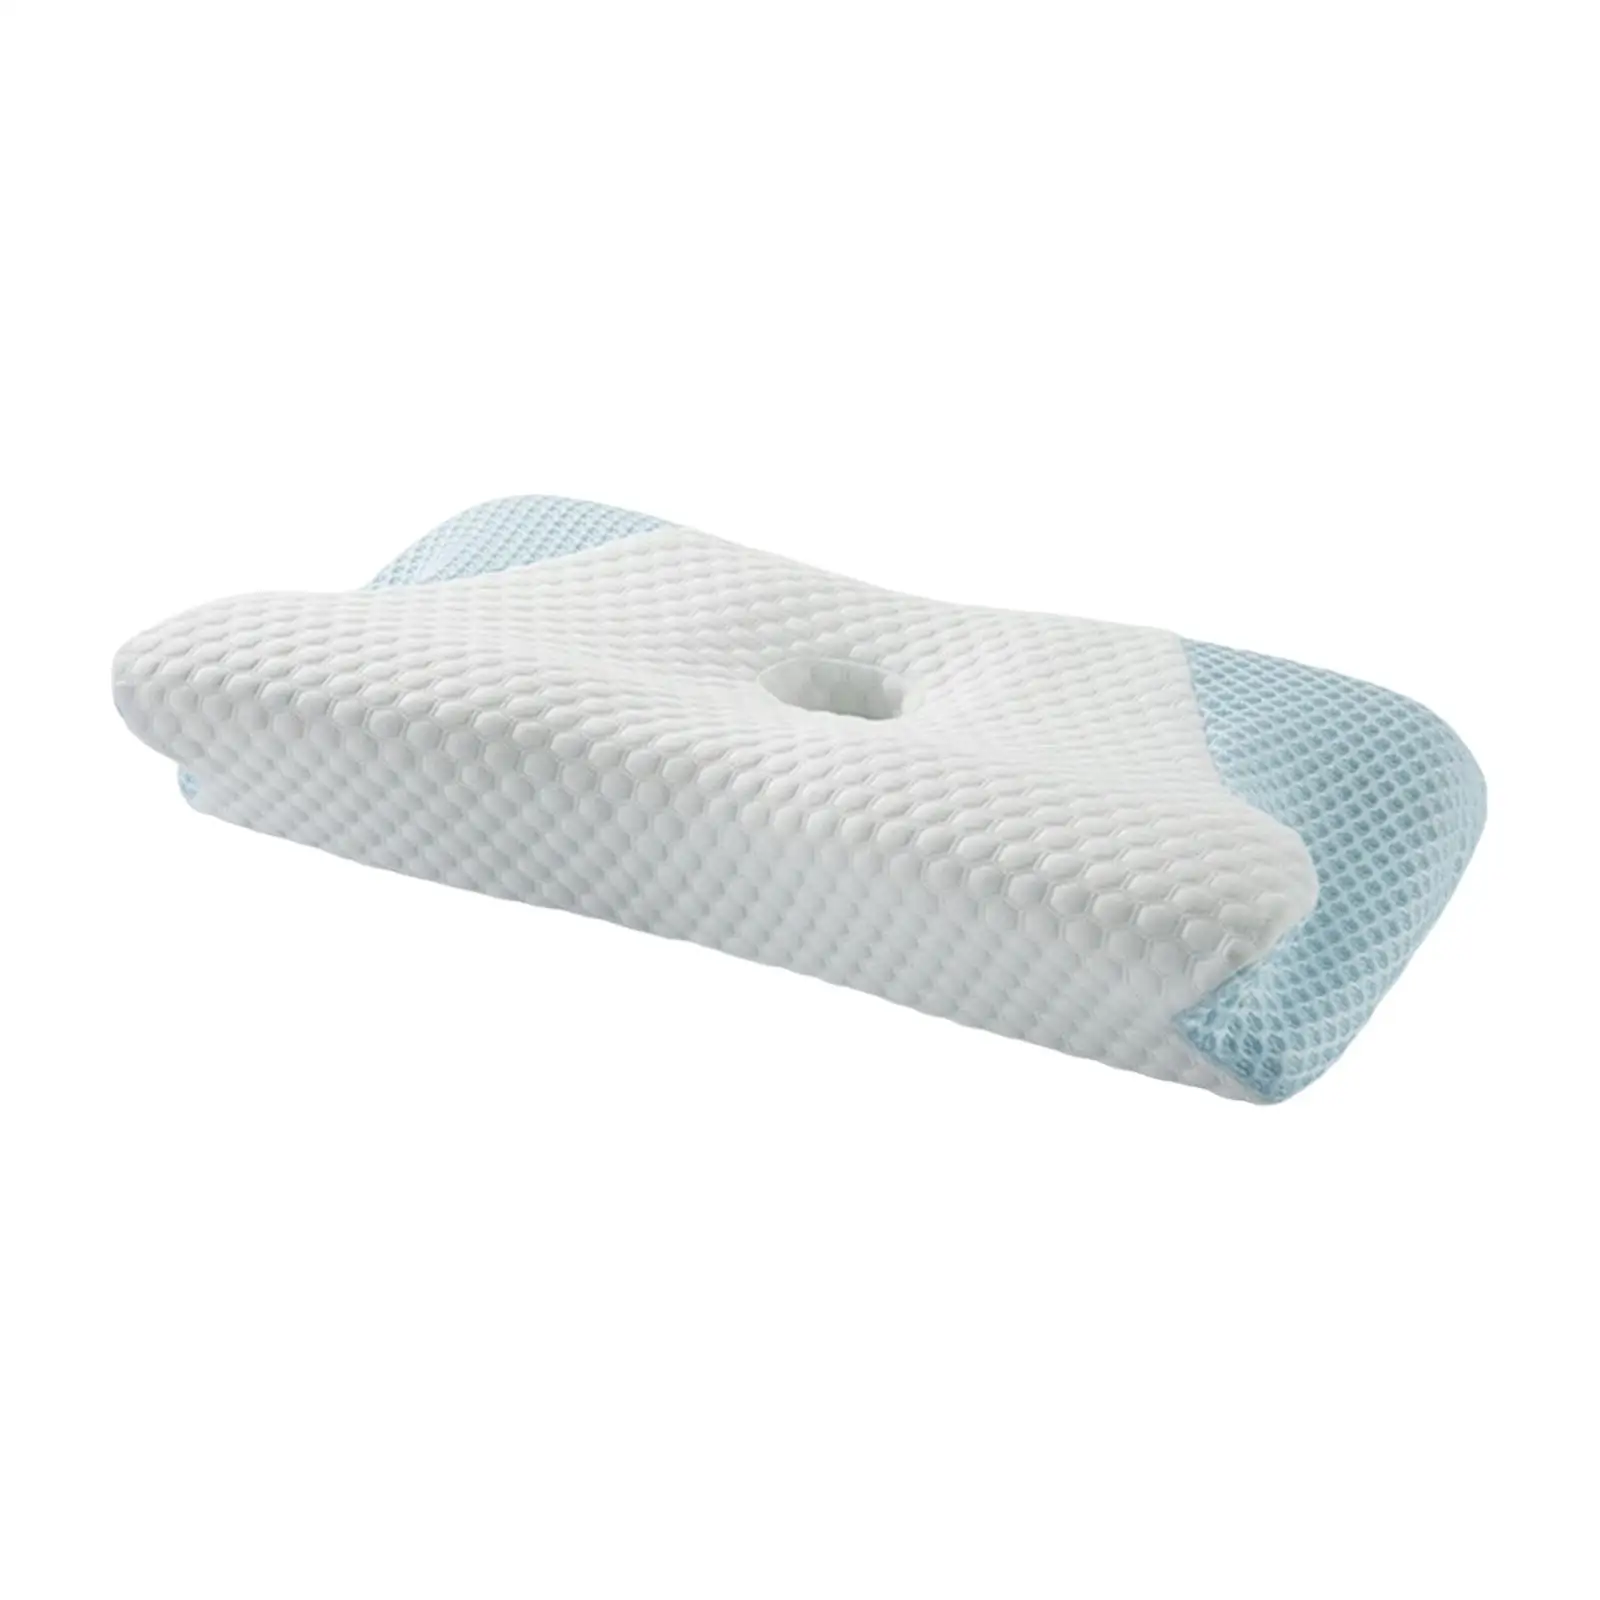 Breathable Sleeping Pillow Reusable Bed Pillow Latex Pillow for Head Gifts